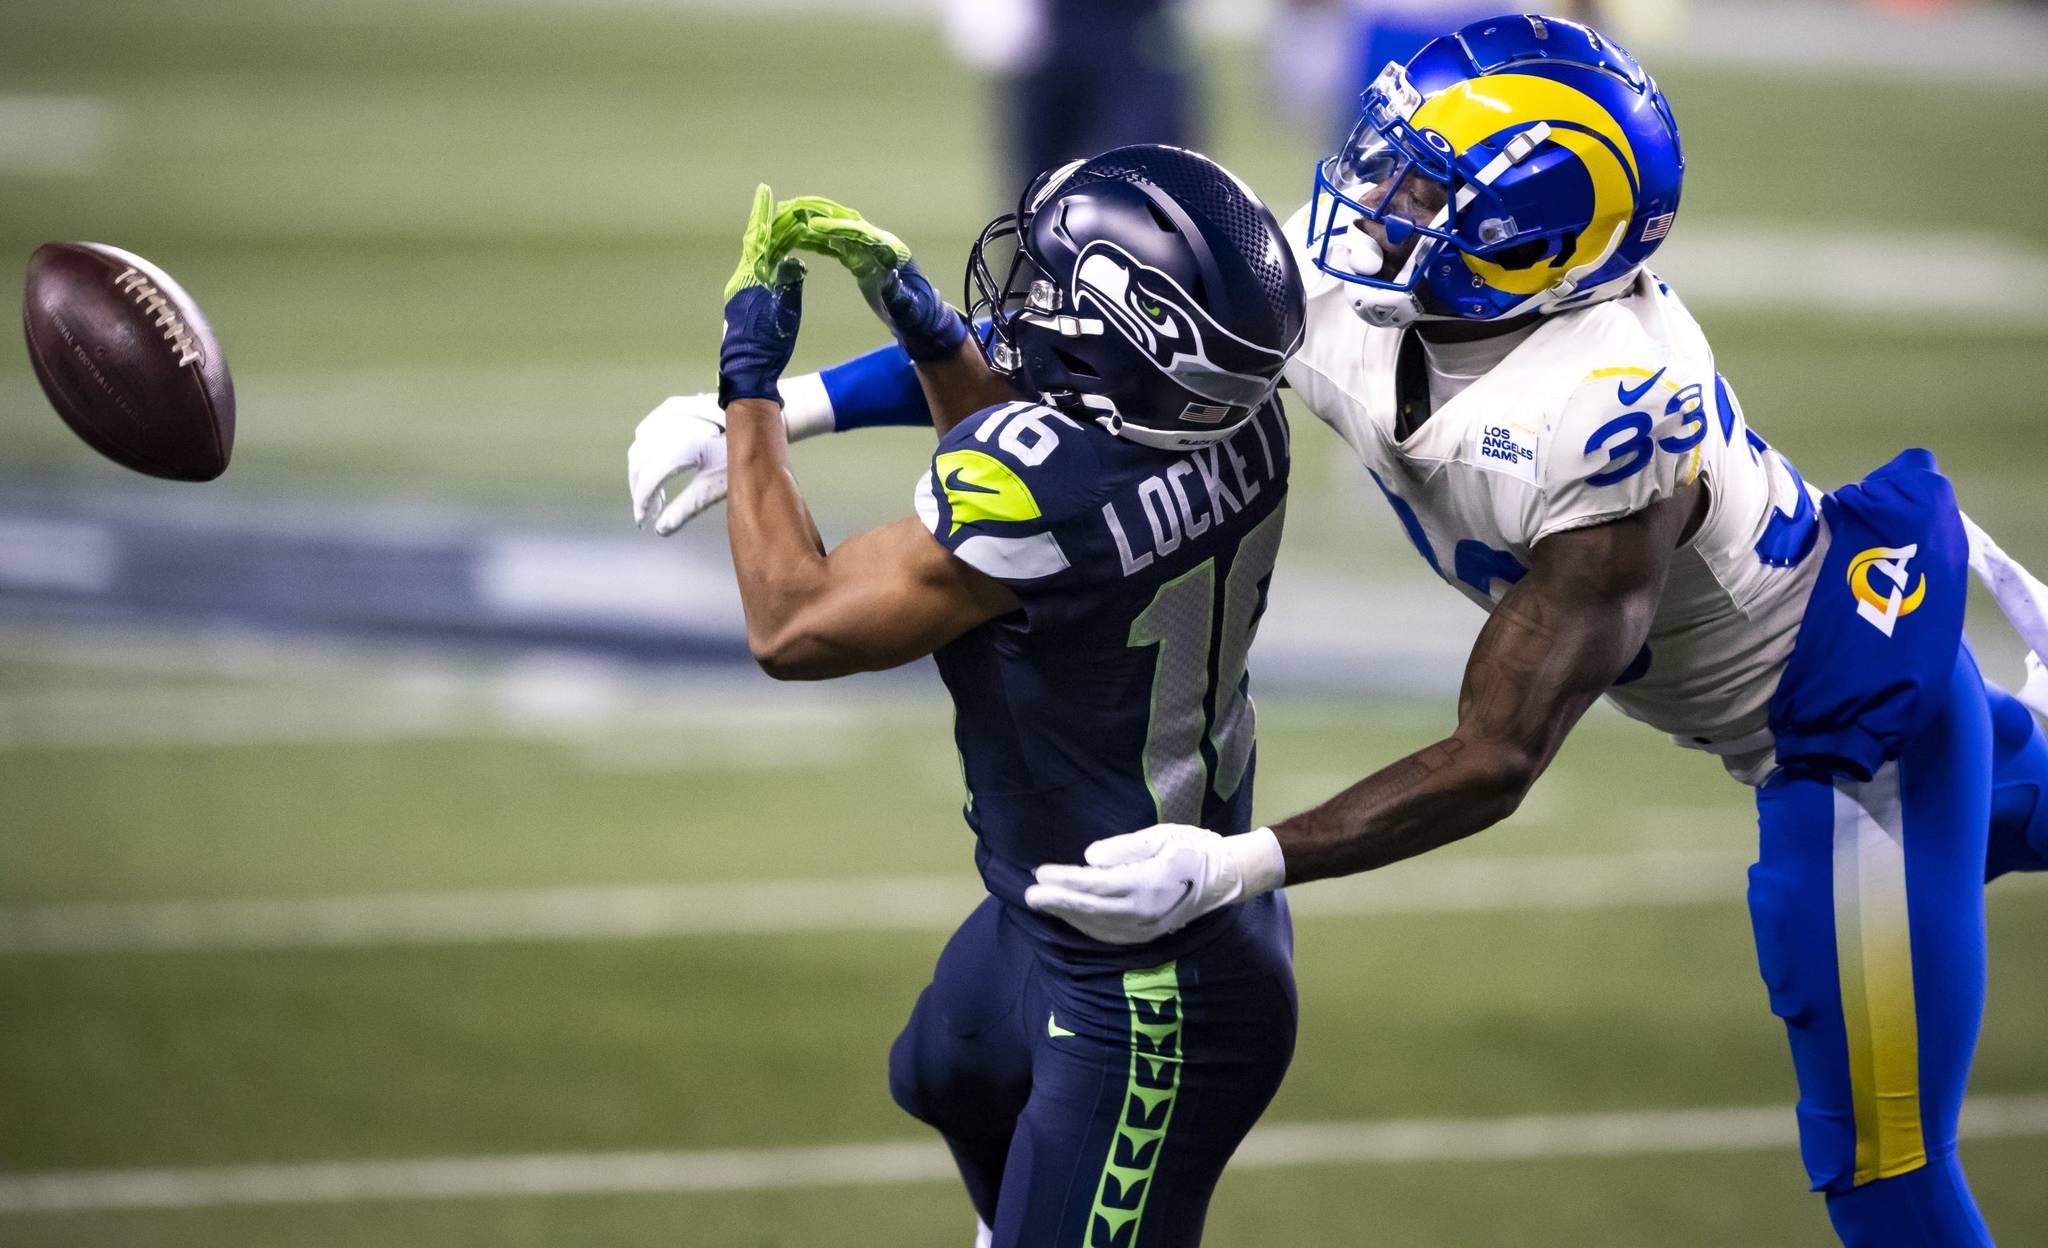 Bettina Hansen/Seattle Times 
On third down, this long pass to Seattle Seahawks wide receiver Tyler Lockett falls incomplete against Rams safety Nick Scott in the final minutes of the game during the Wild Card round of the NFL Playoffs on Saturday at Lumen Field in Seattle.